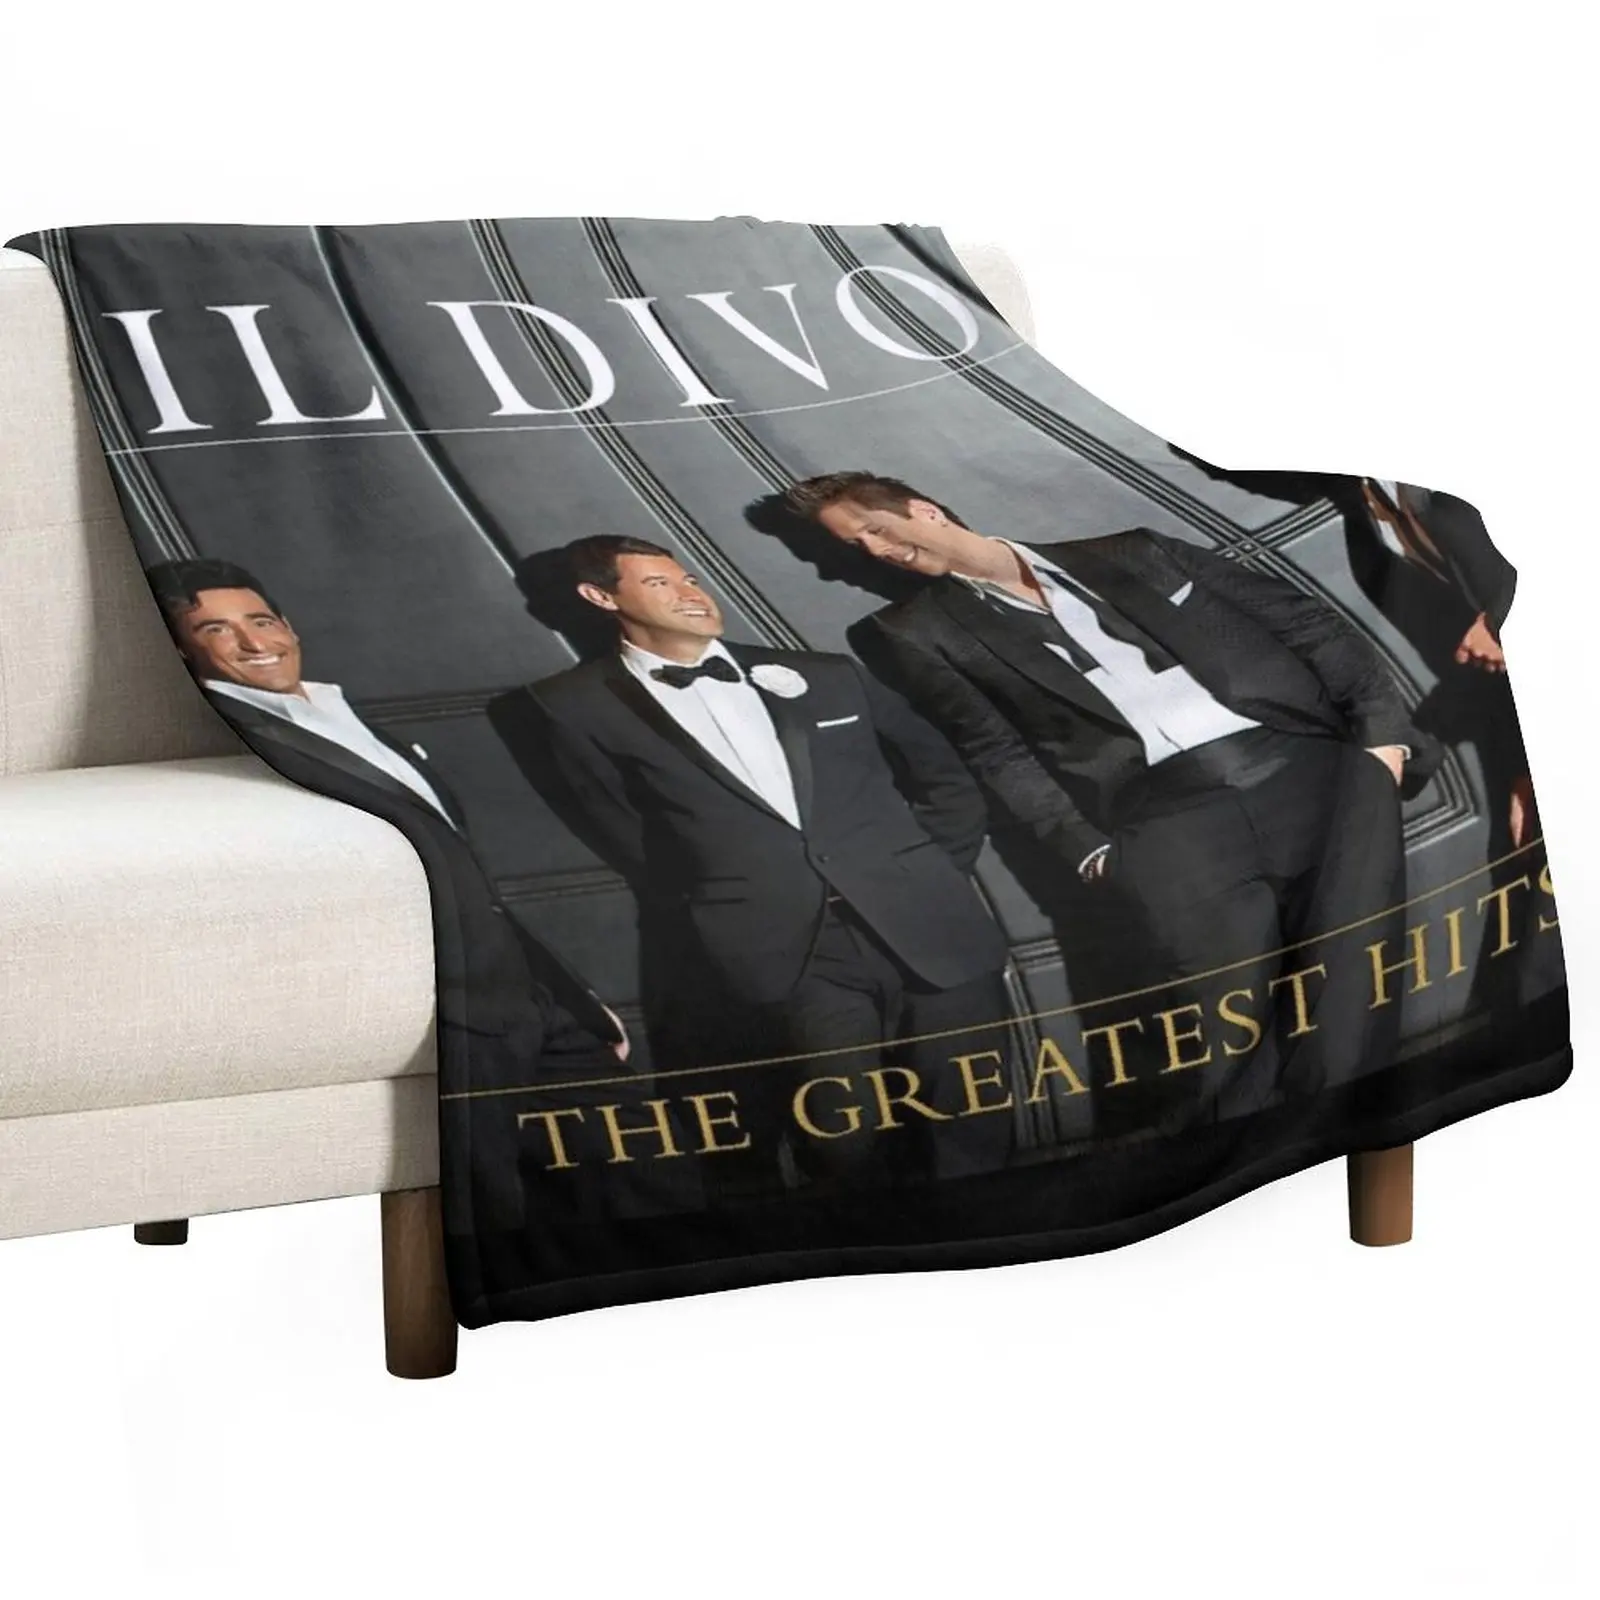 

Il Divo greatest hits deluxe 2 cd version Throw Blanket Giant Sofa Blanket Flannel Blanket